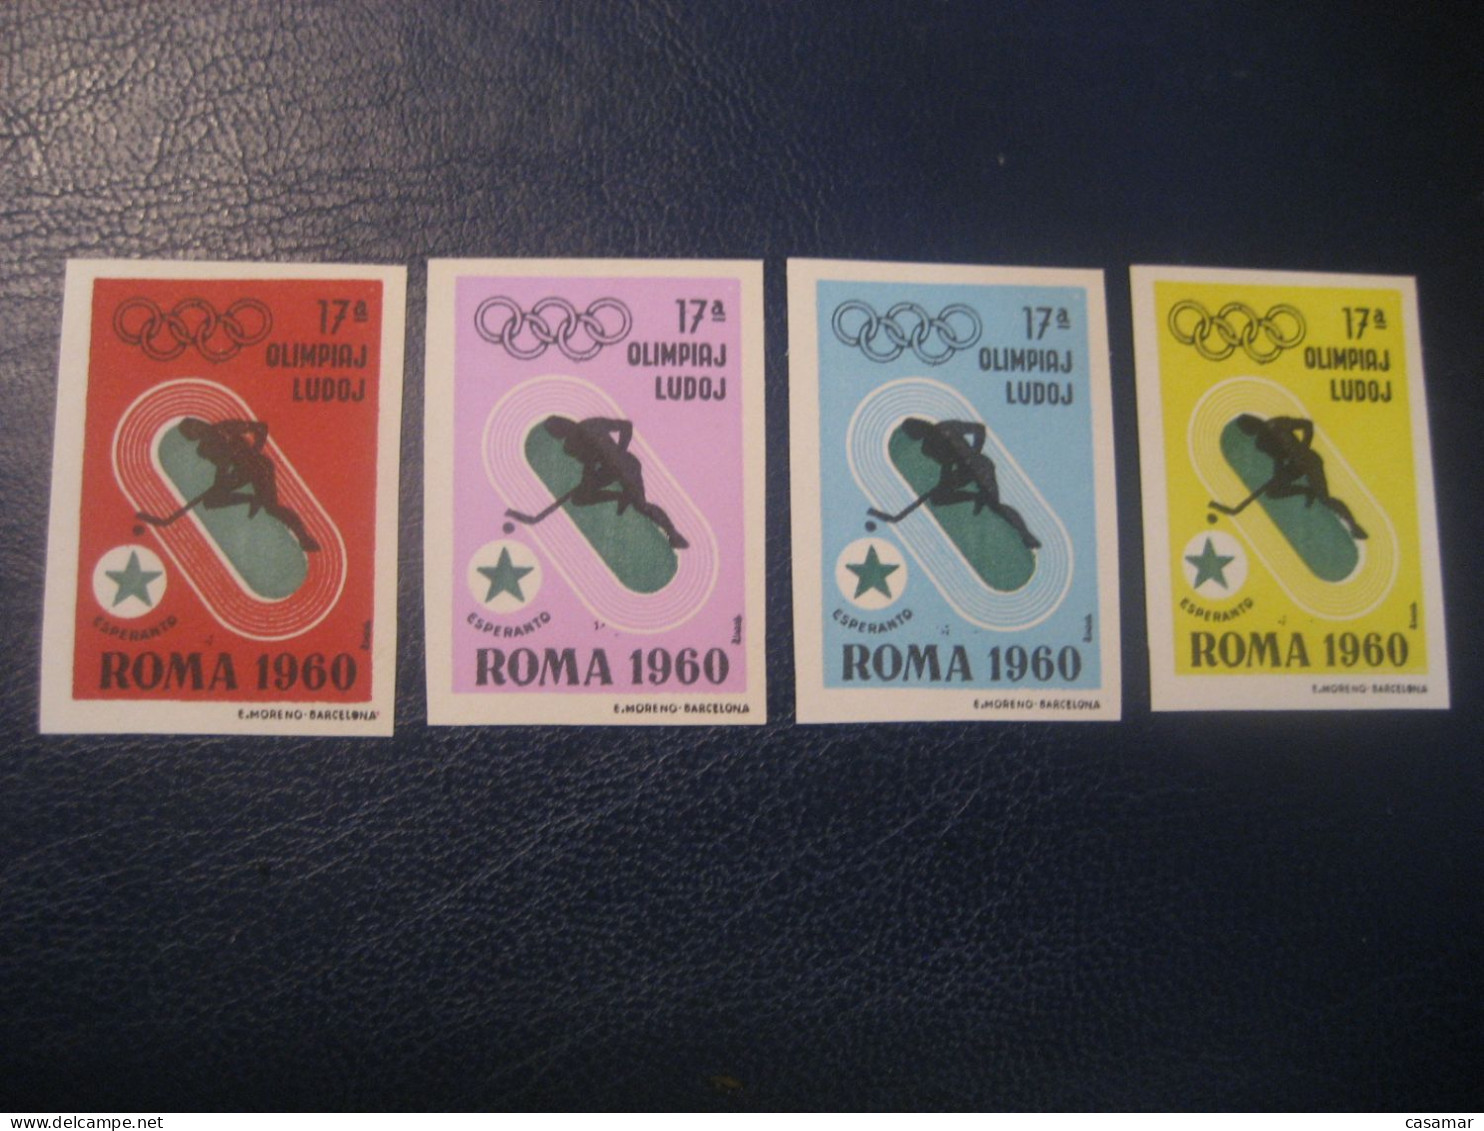 ROMA 1960 Ice Hockey Sur Glace Olympic Games Olympics Esperanto 4 Imperforated Poster Stamp Vignette ITALY Spain Label - Hockey (Ijs)